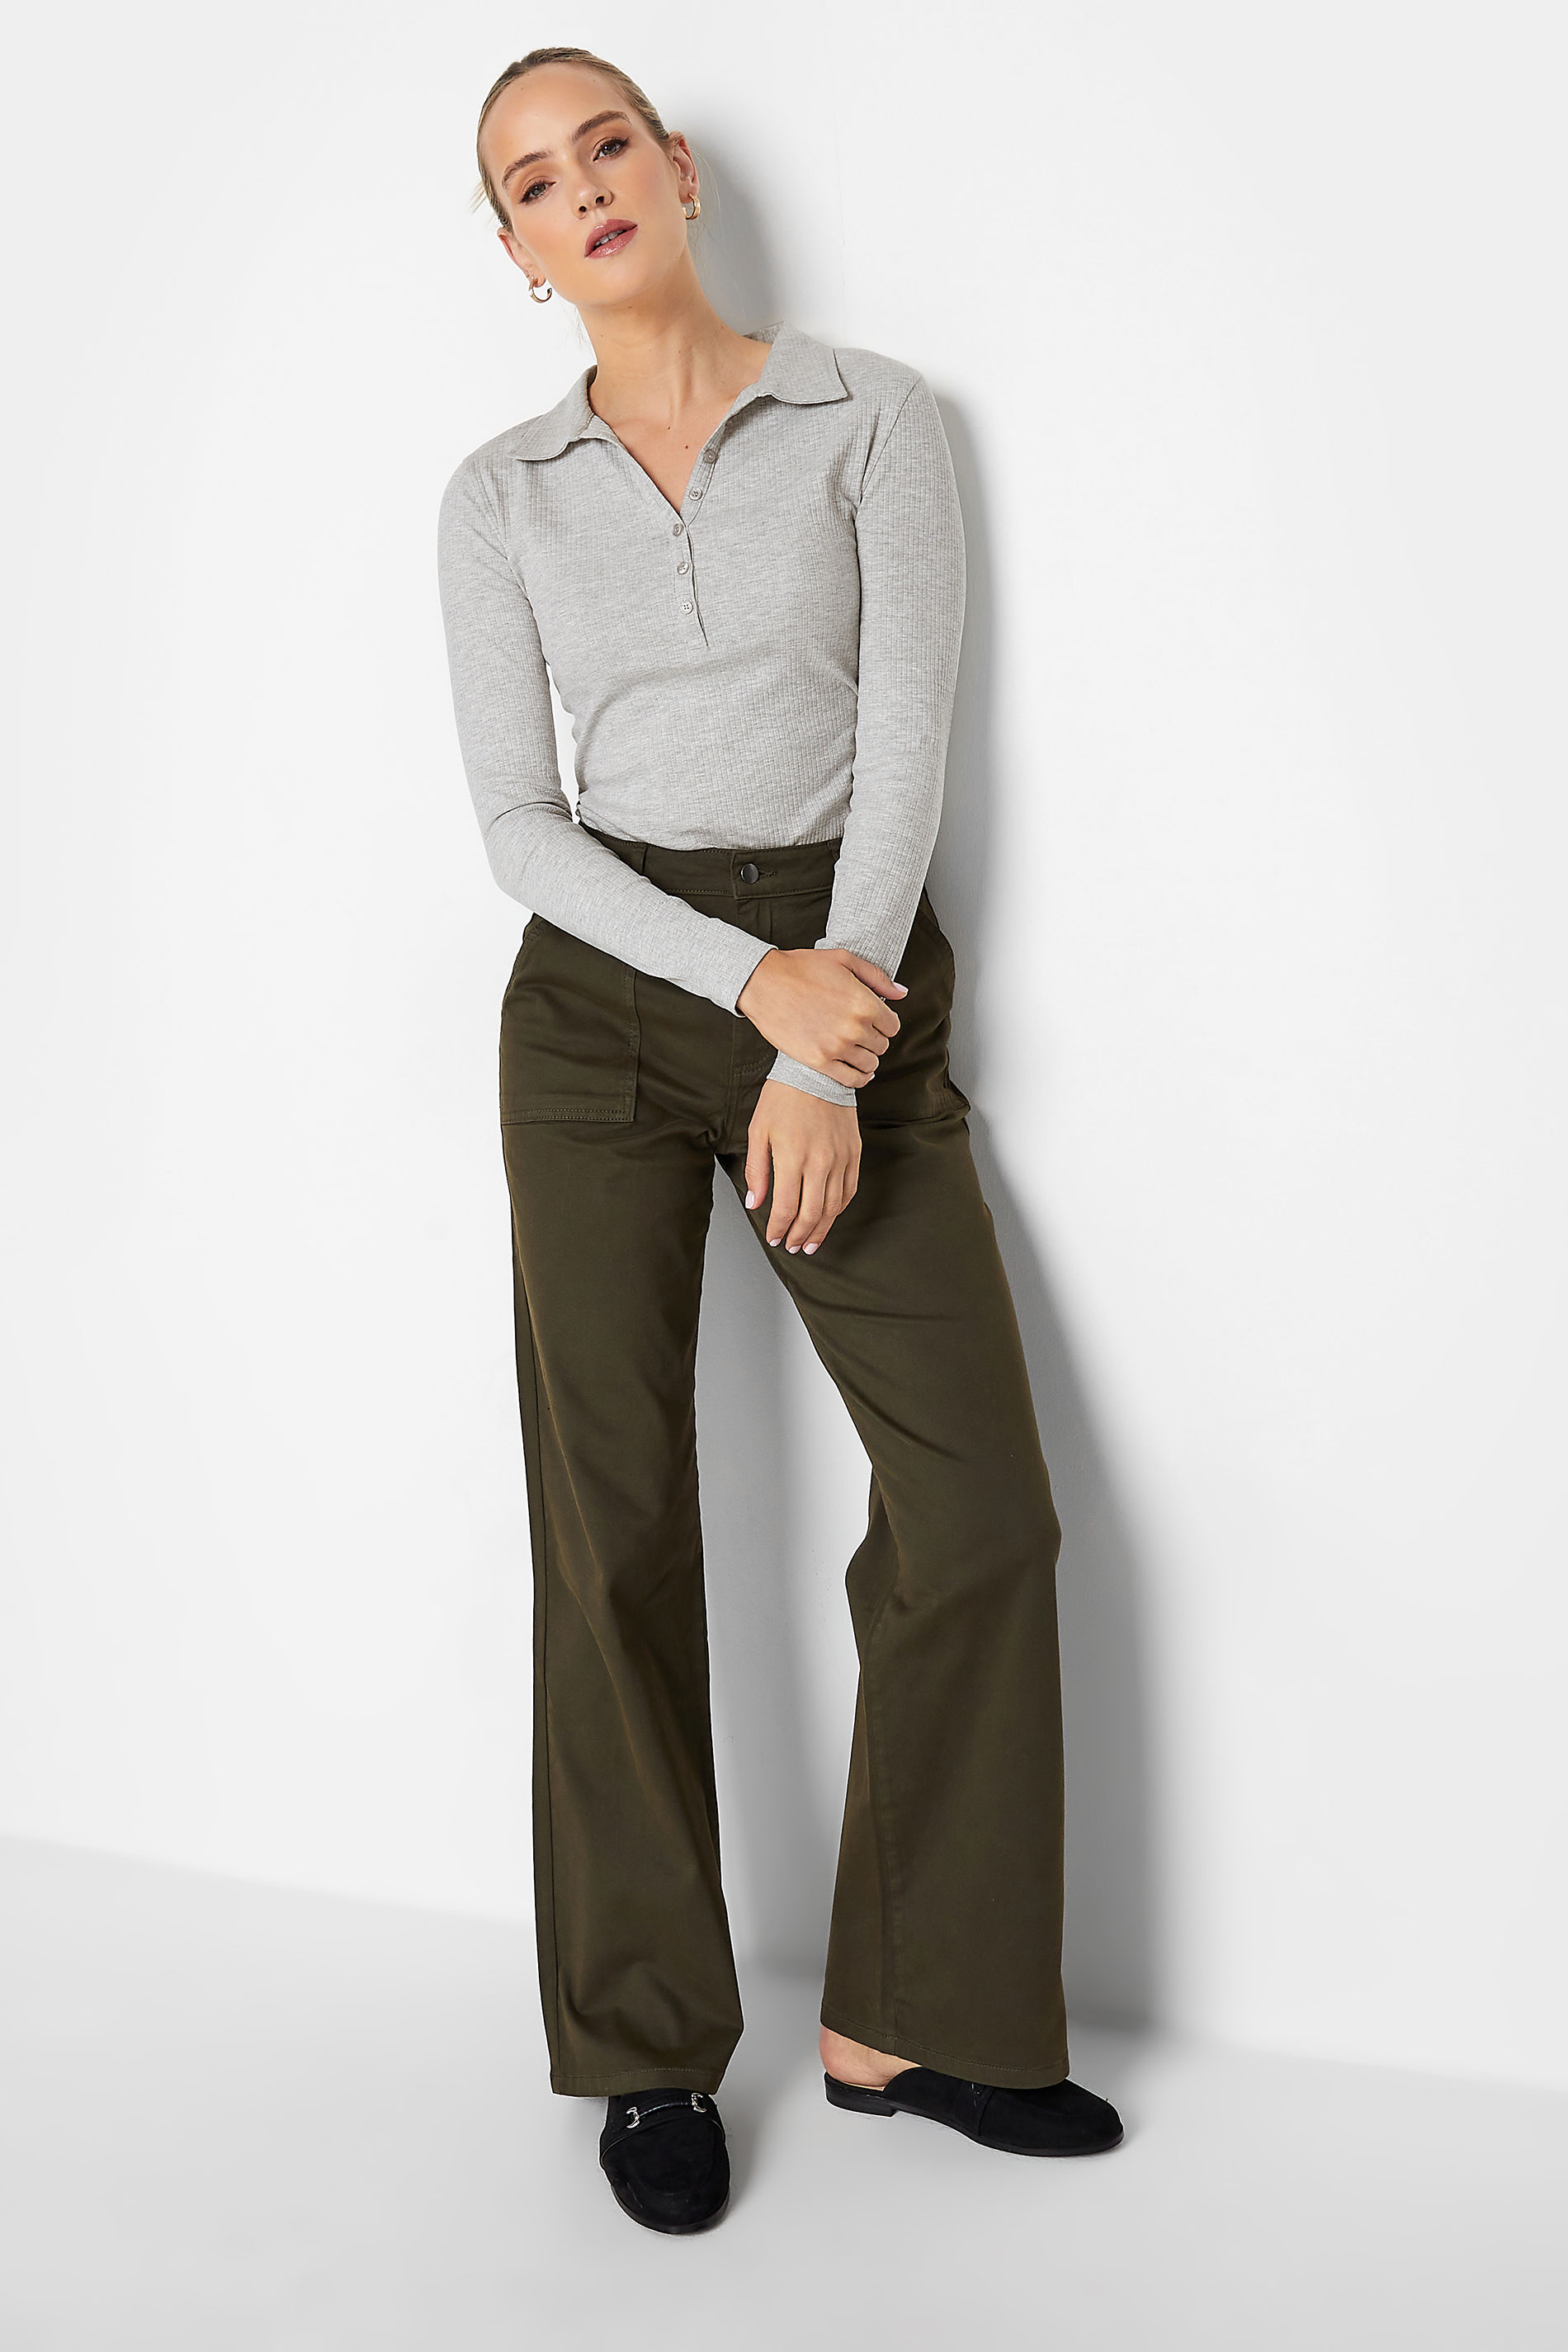 LTS Tall Grey Ribbed Button Detail Collared Top | Long Tall Sally 2